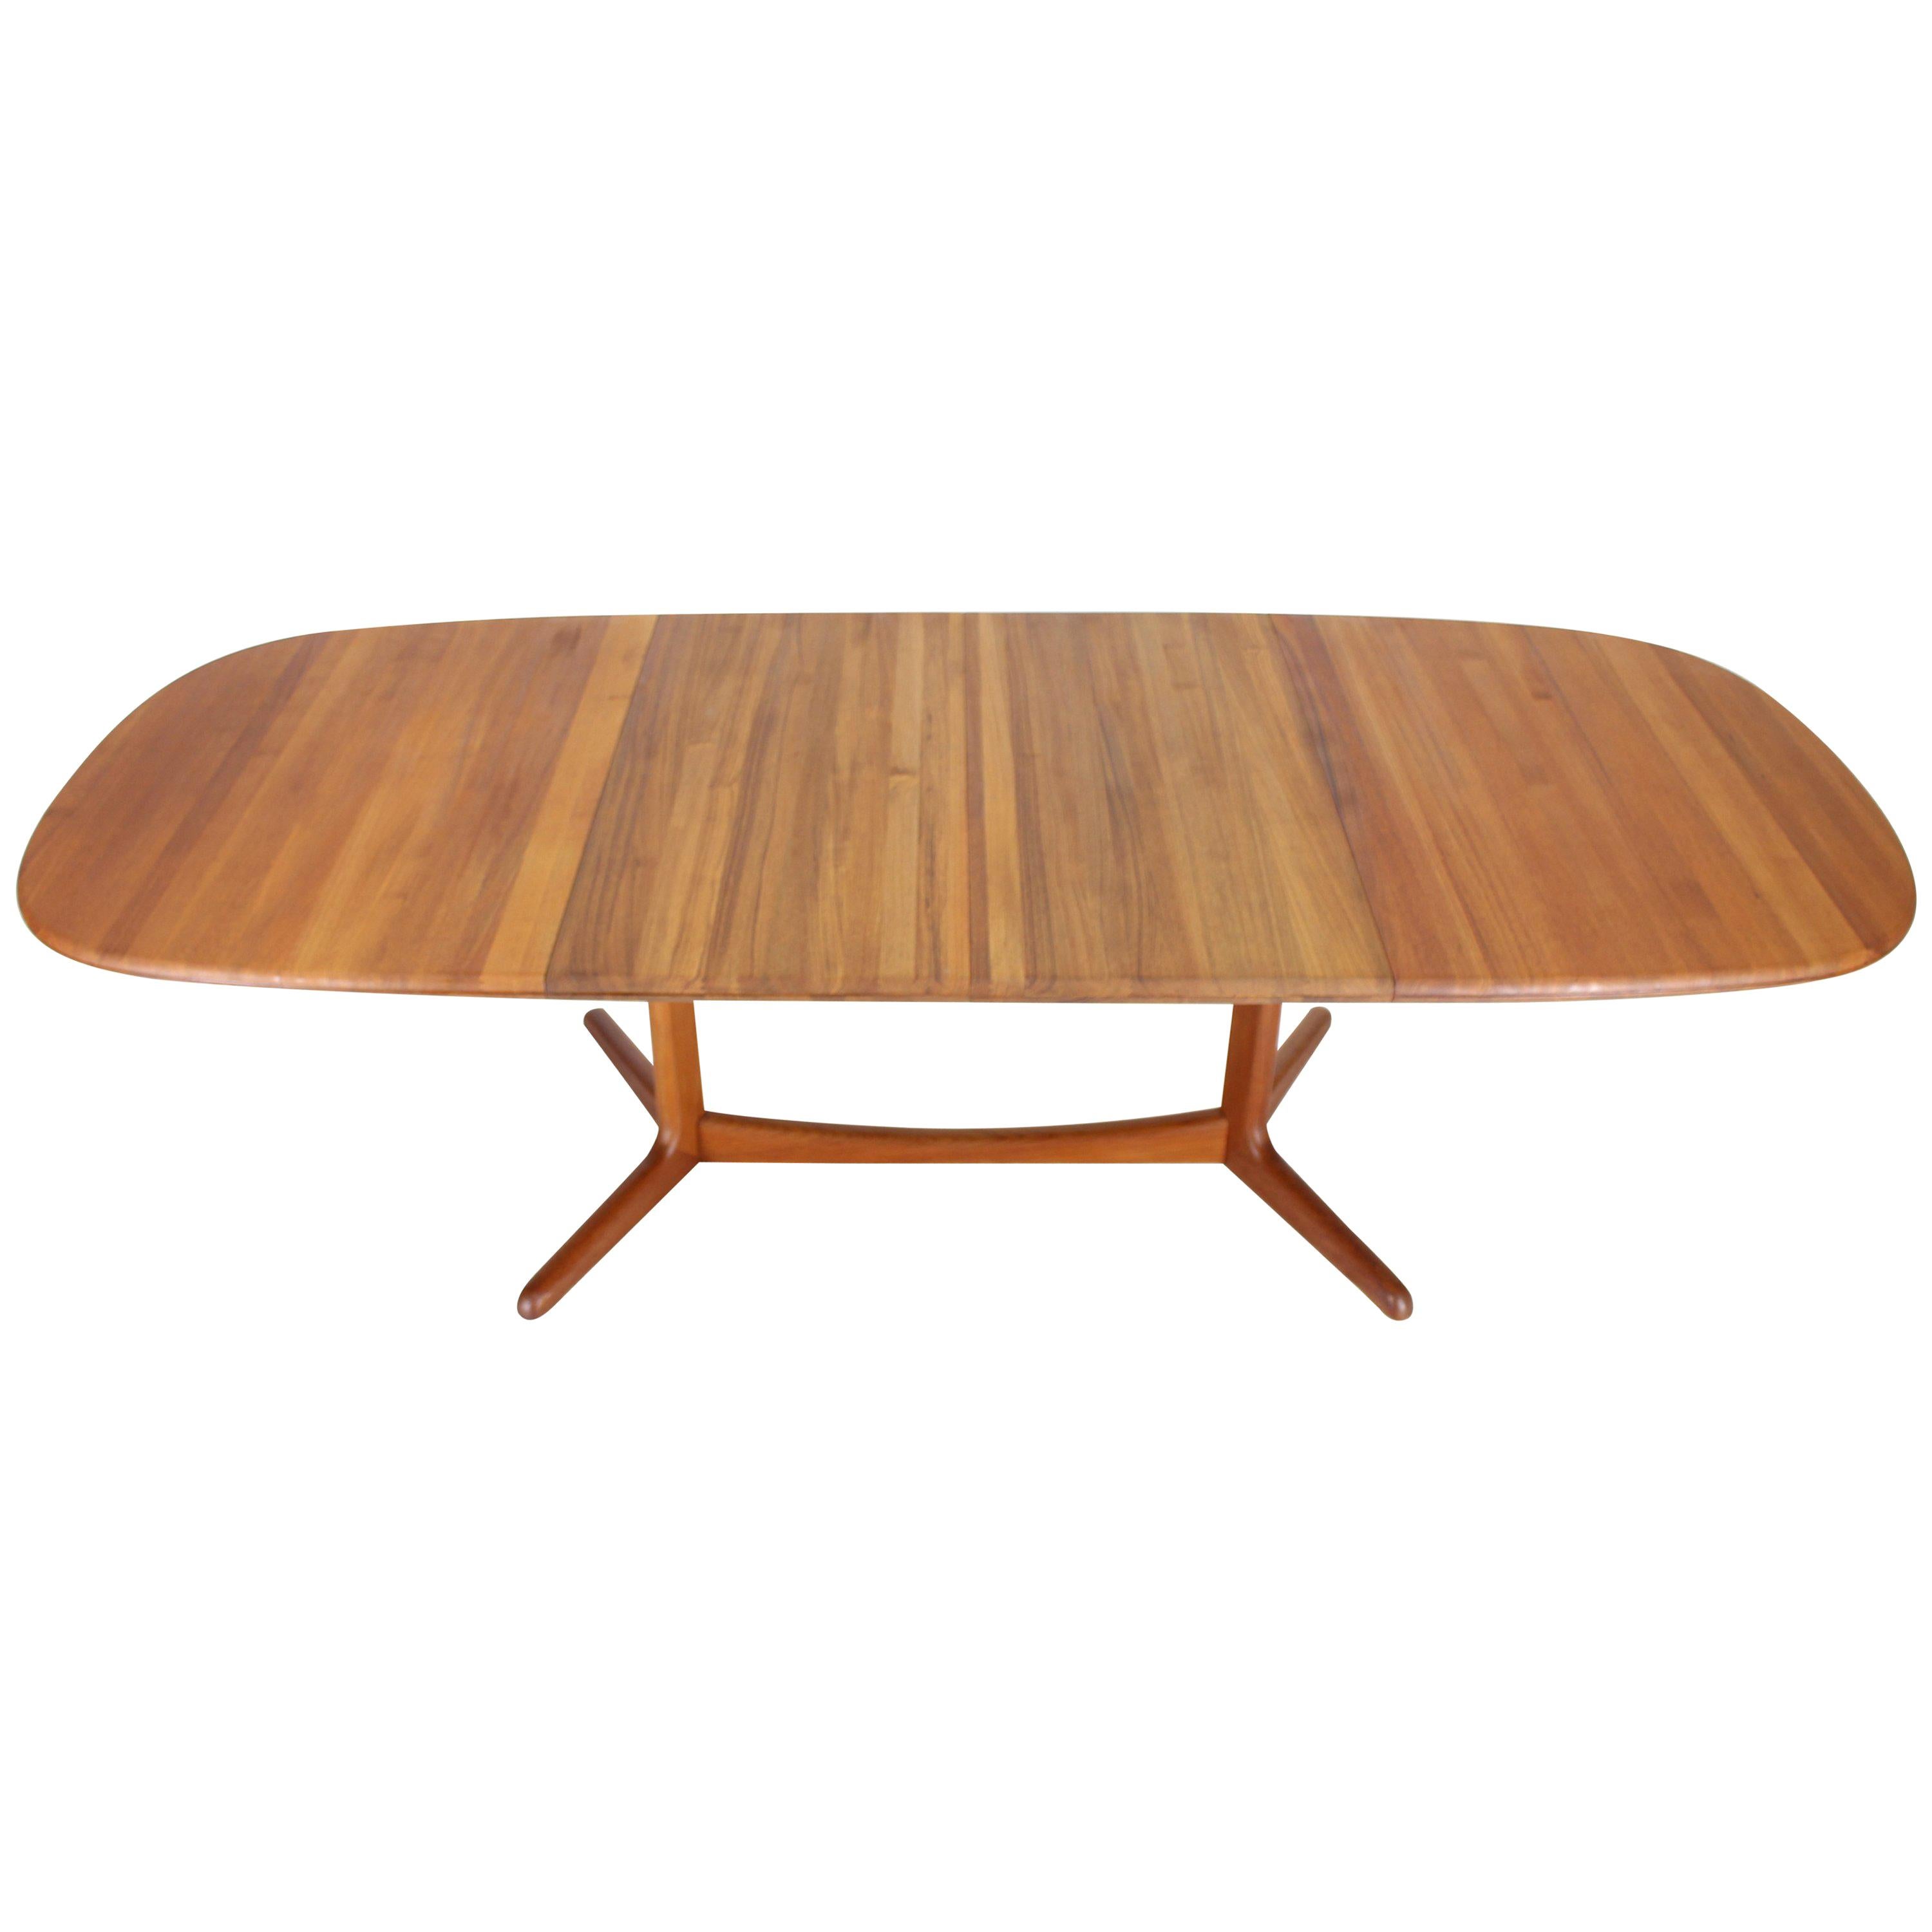 Solid Teak Danish Mid-Century Modern Dining Table with Two Leafs